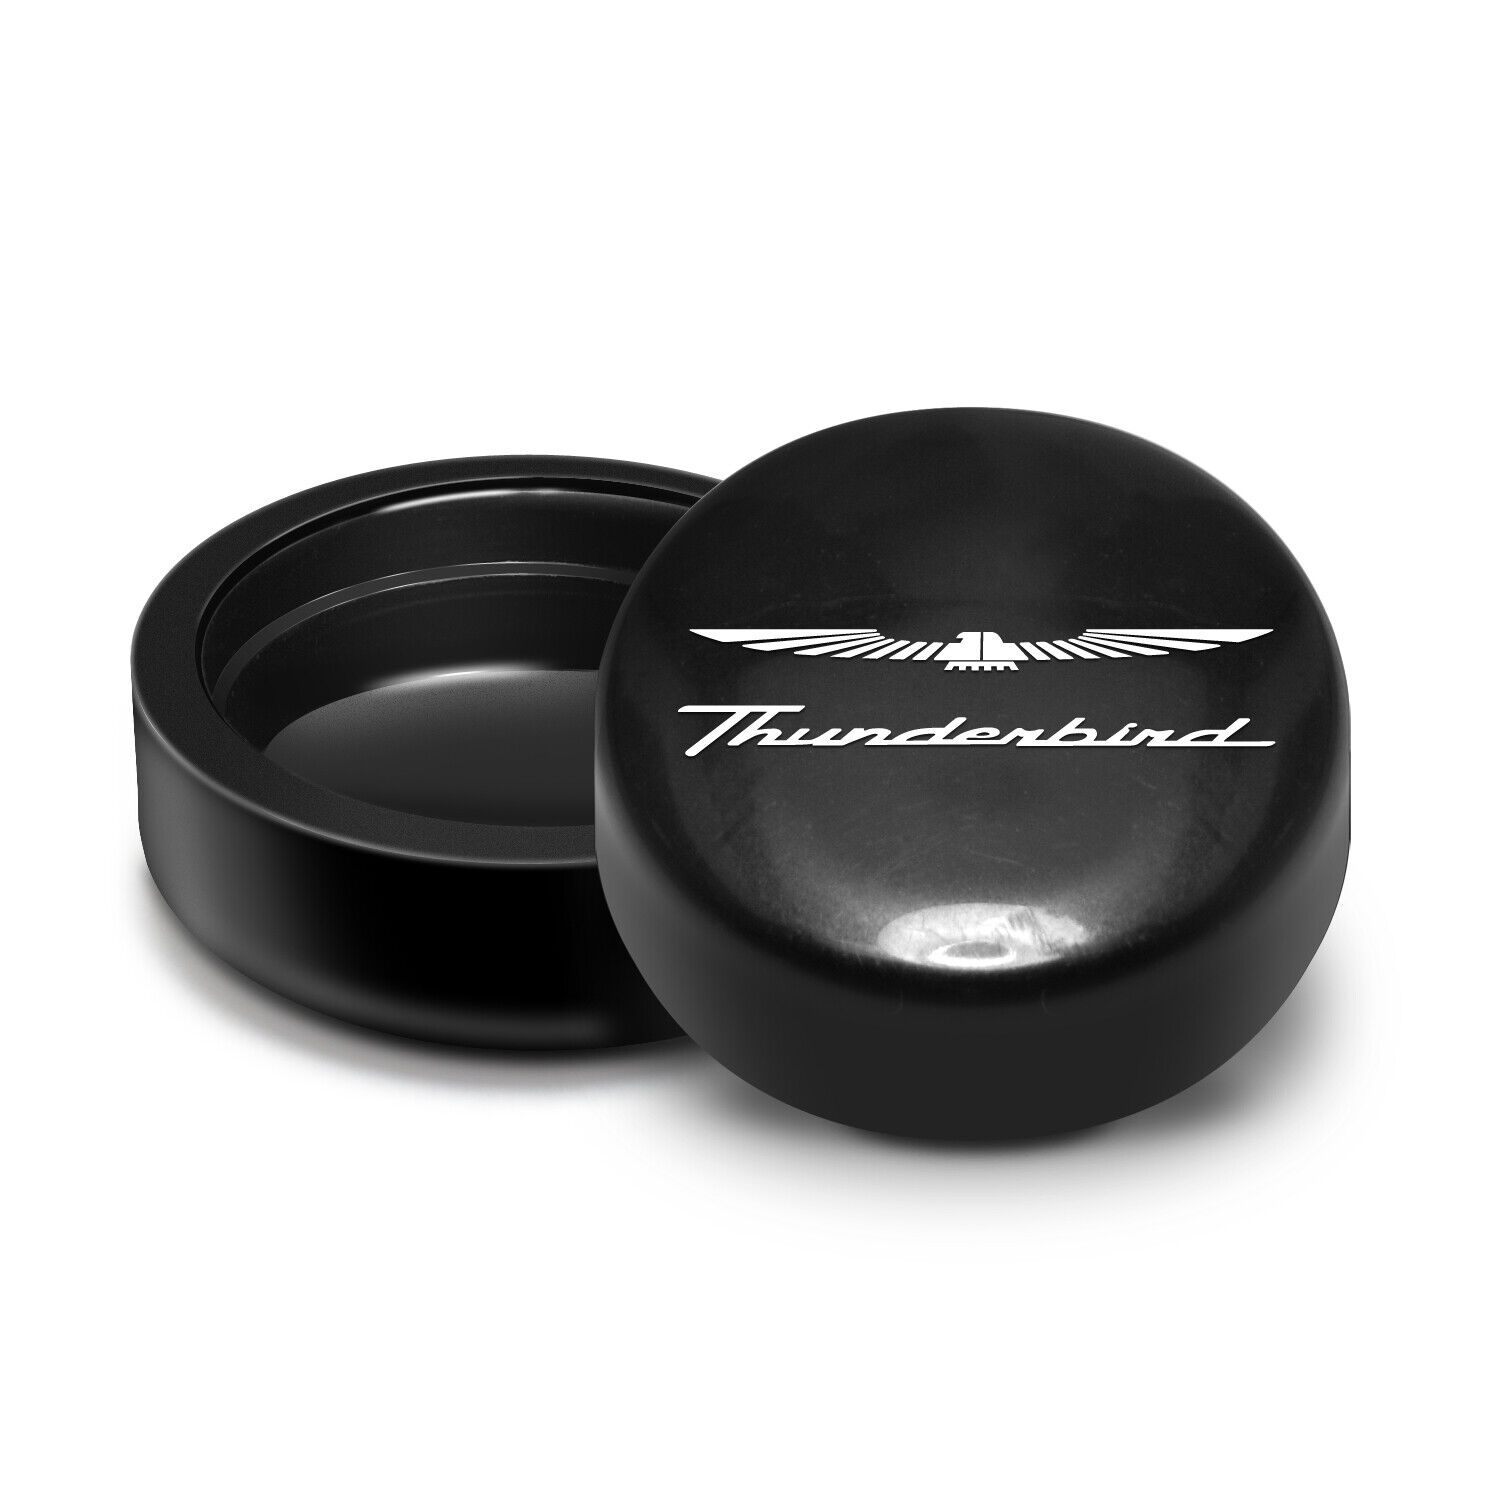 Ford Thunderbird on Black ABS Plastic License Plate Frame Screw Covers